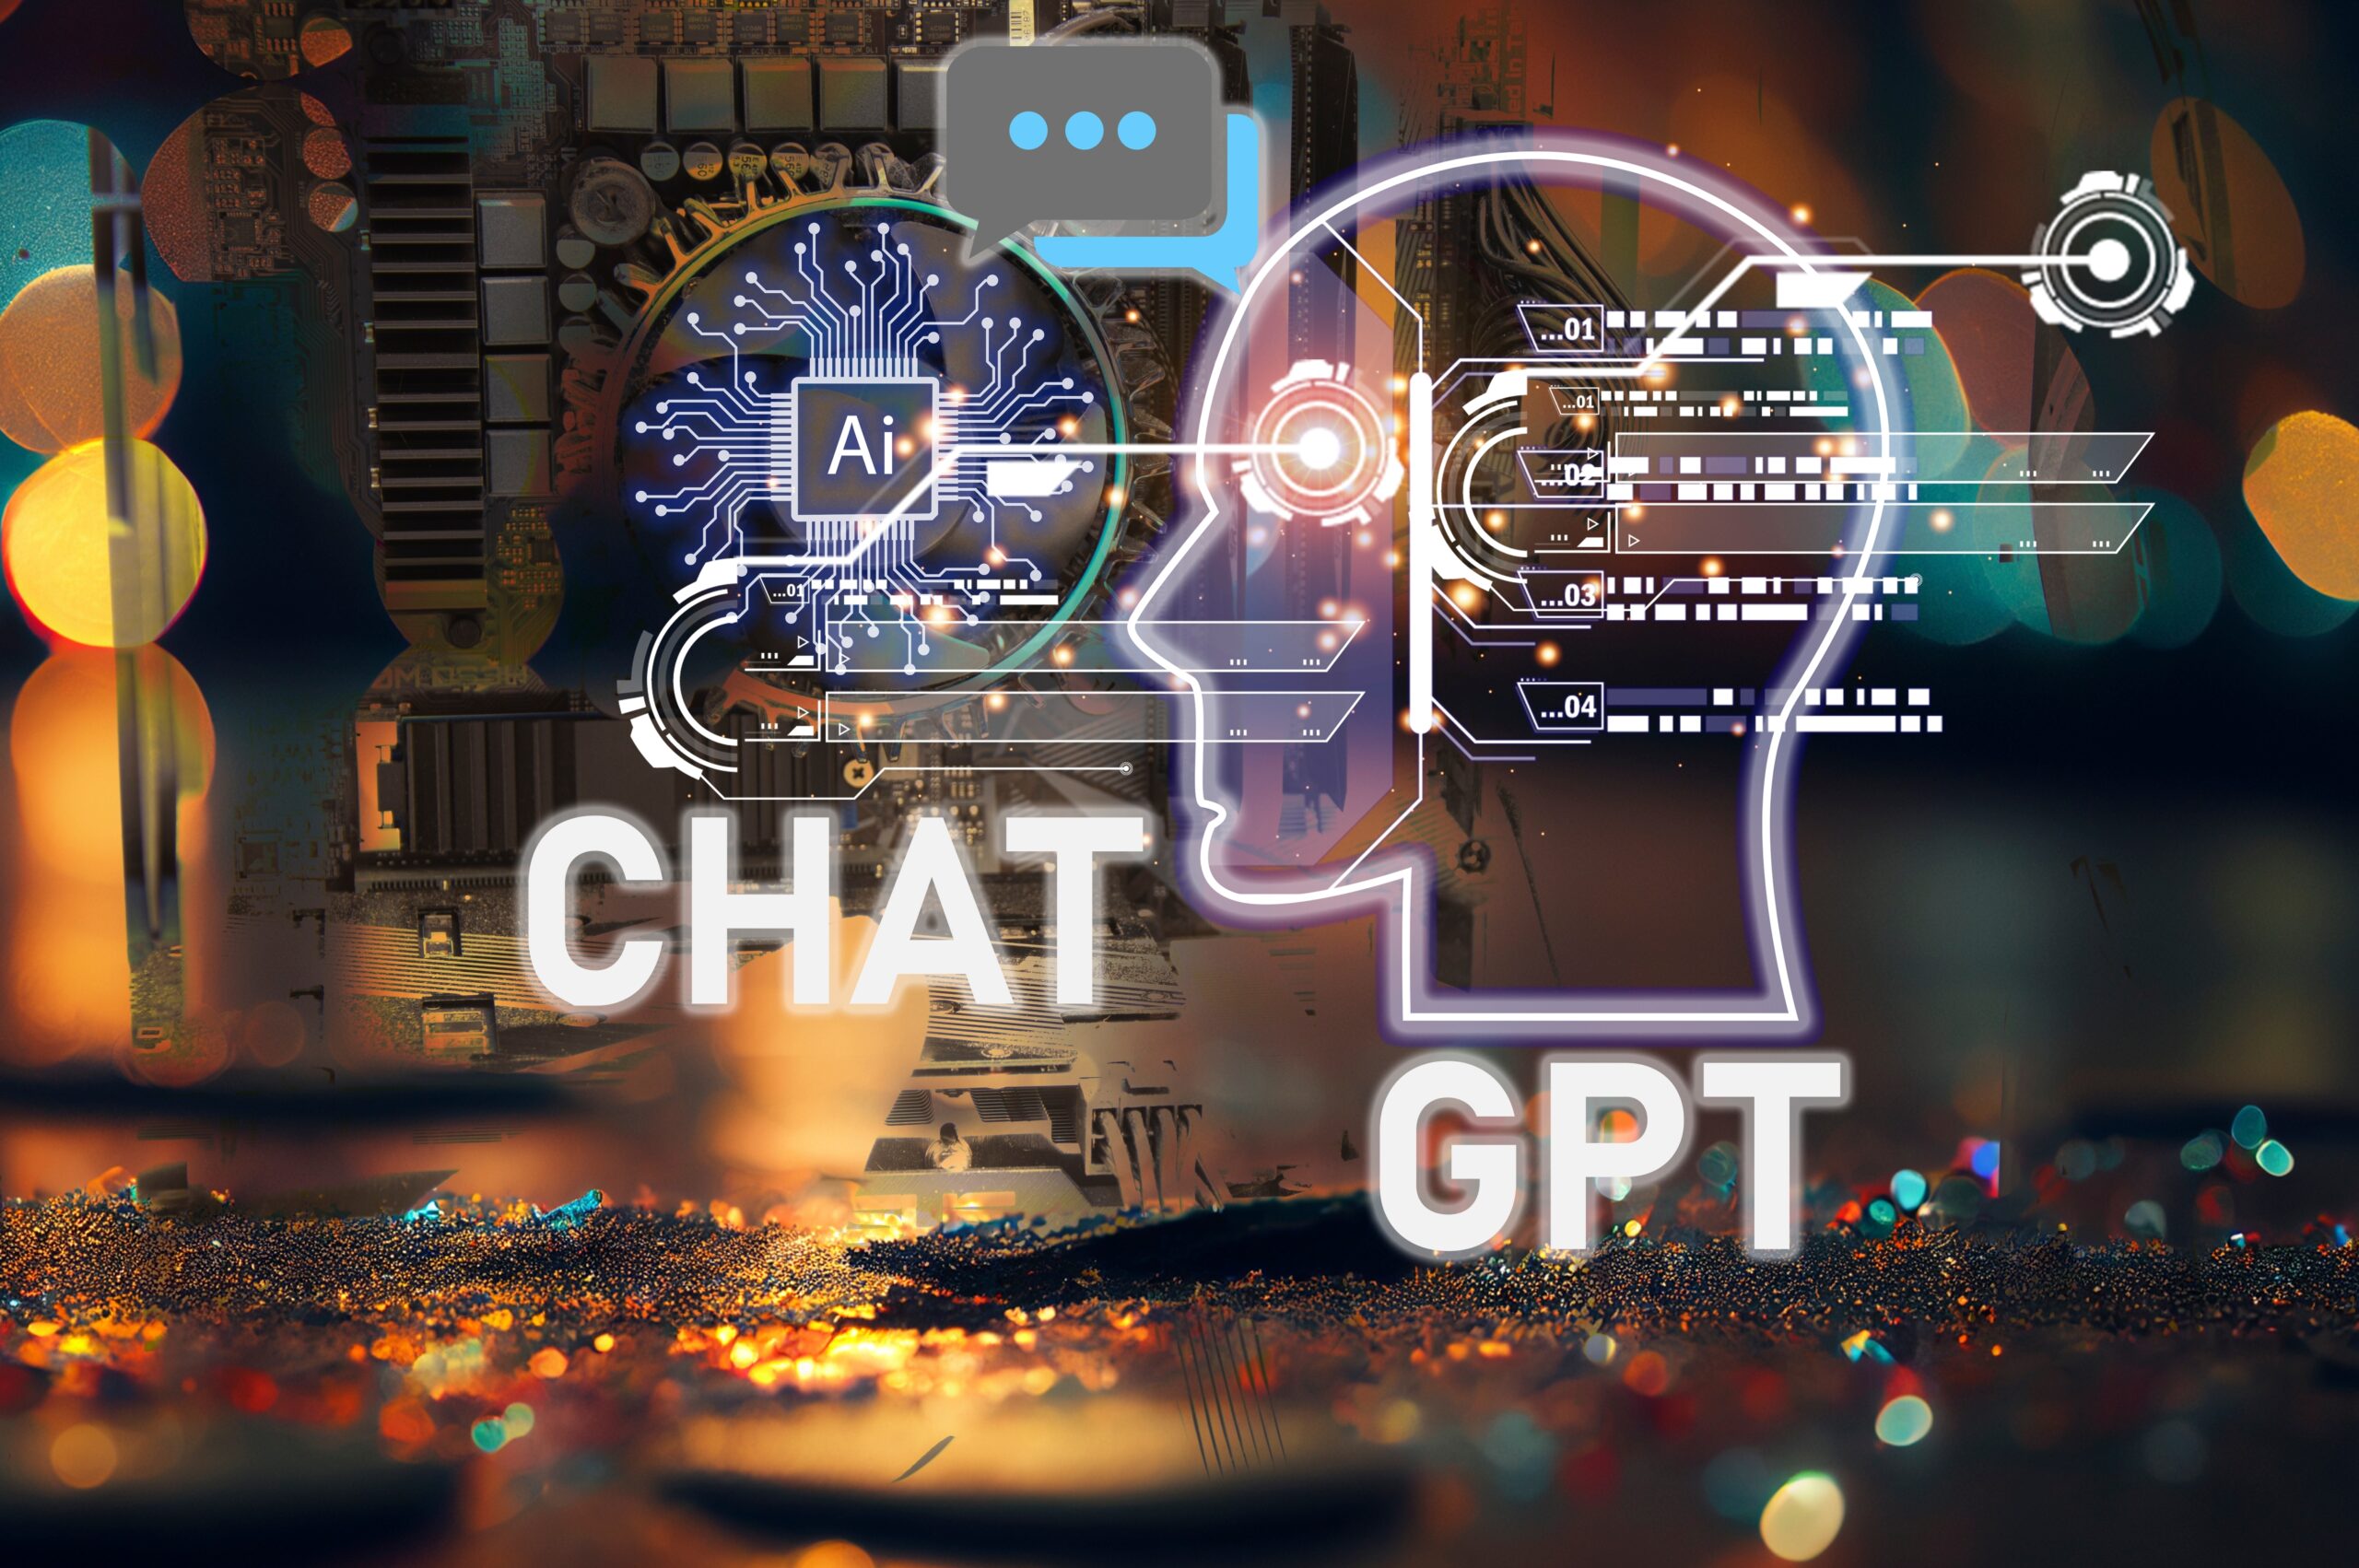 ChatGPT for Marketing and Productivity with AI Tools